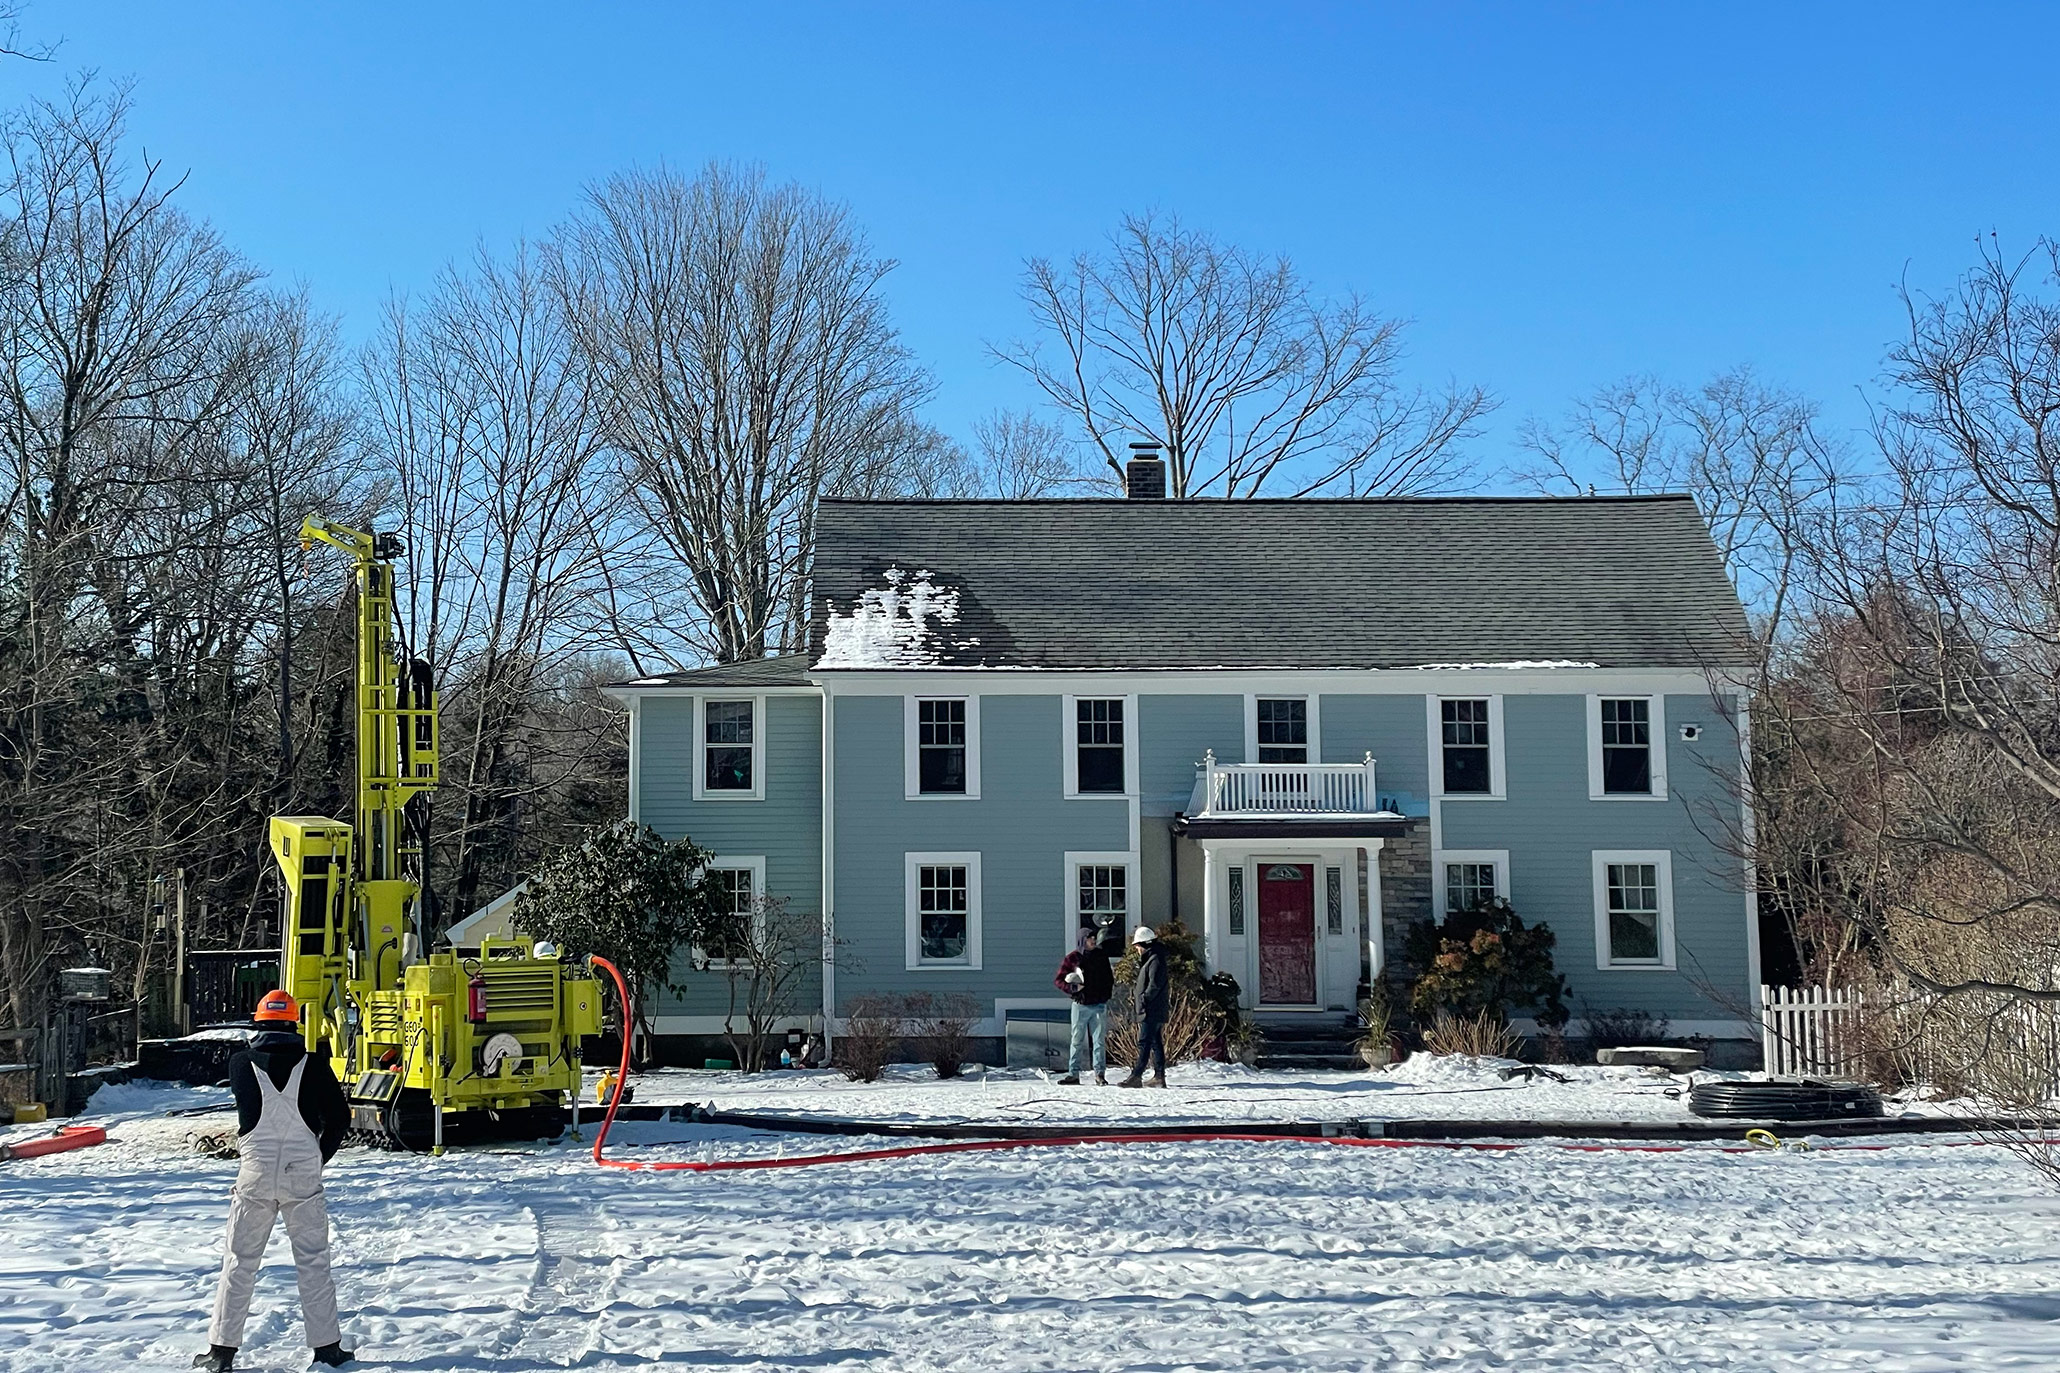 Dandelion installs geothermal heat pumps in a residential home in New York.&nbsp;